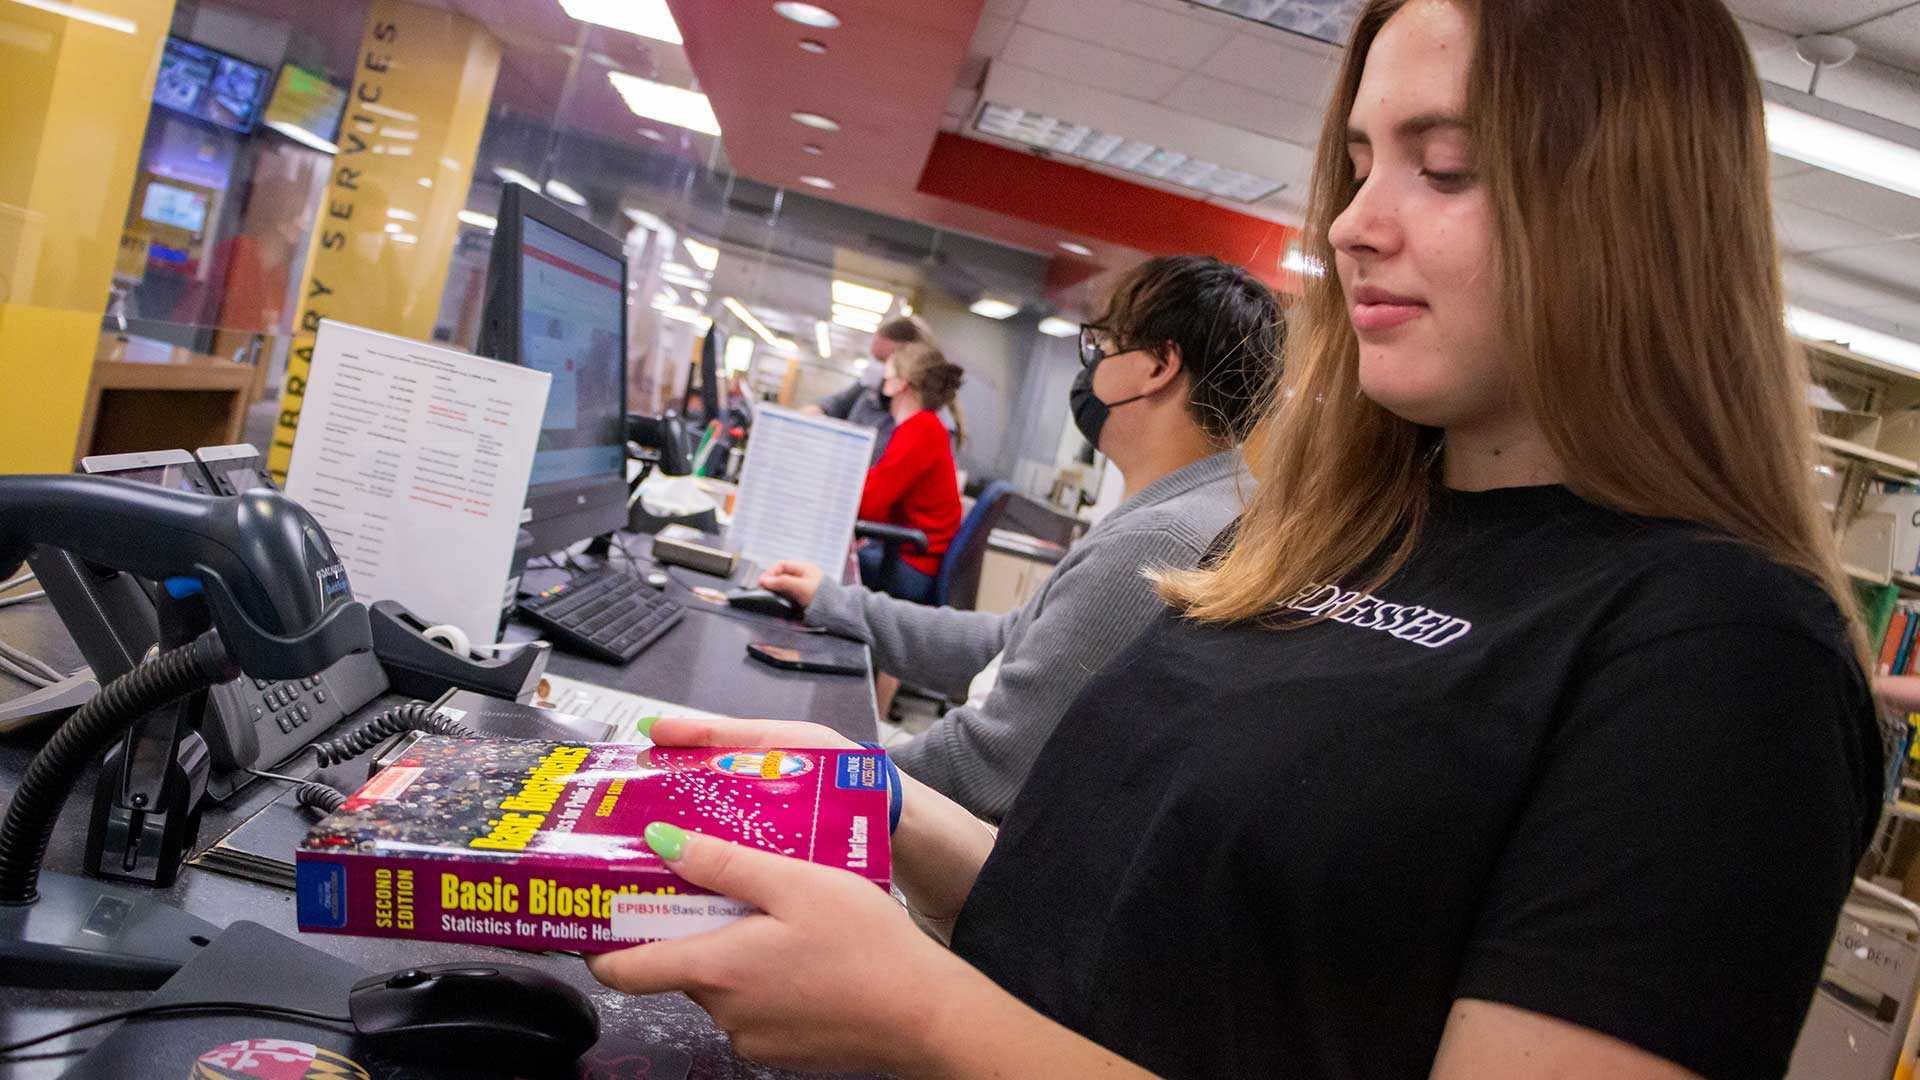 Student scans book in library